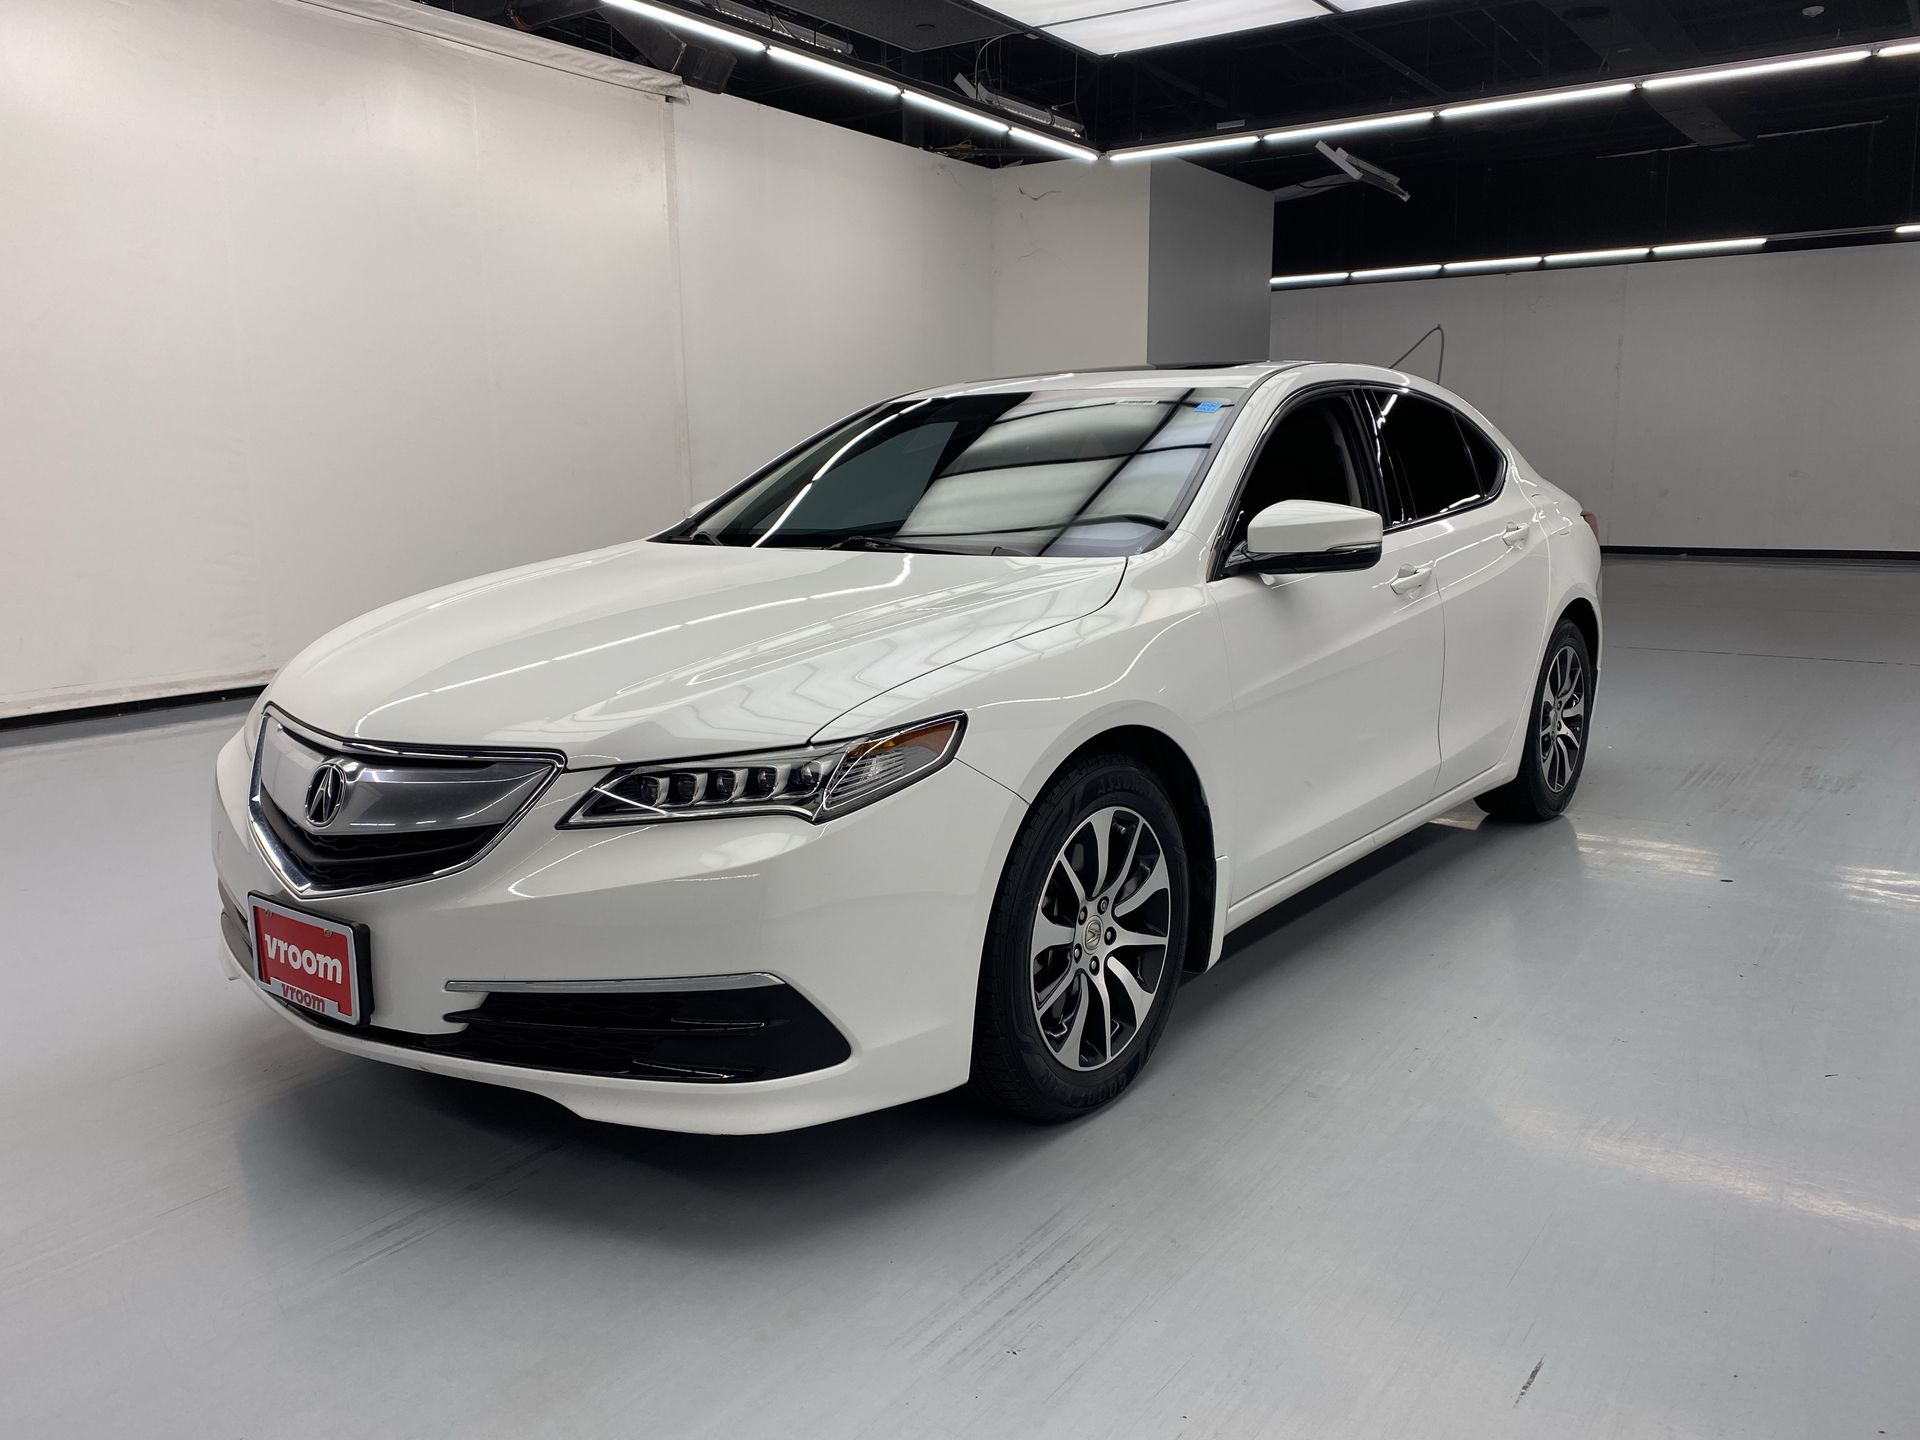 Used 2016 Acura Tlx For Sale 21 999 Vroom